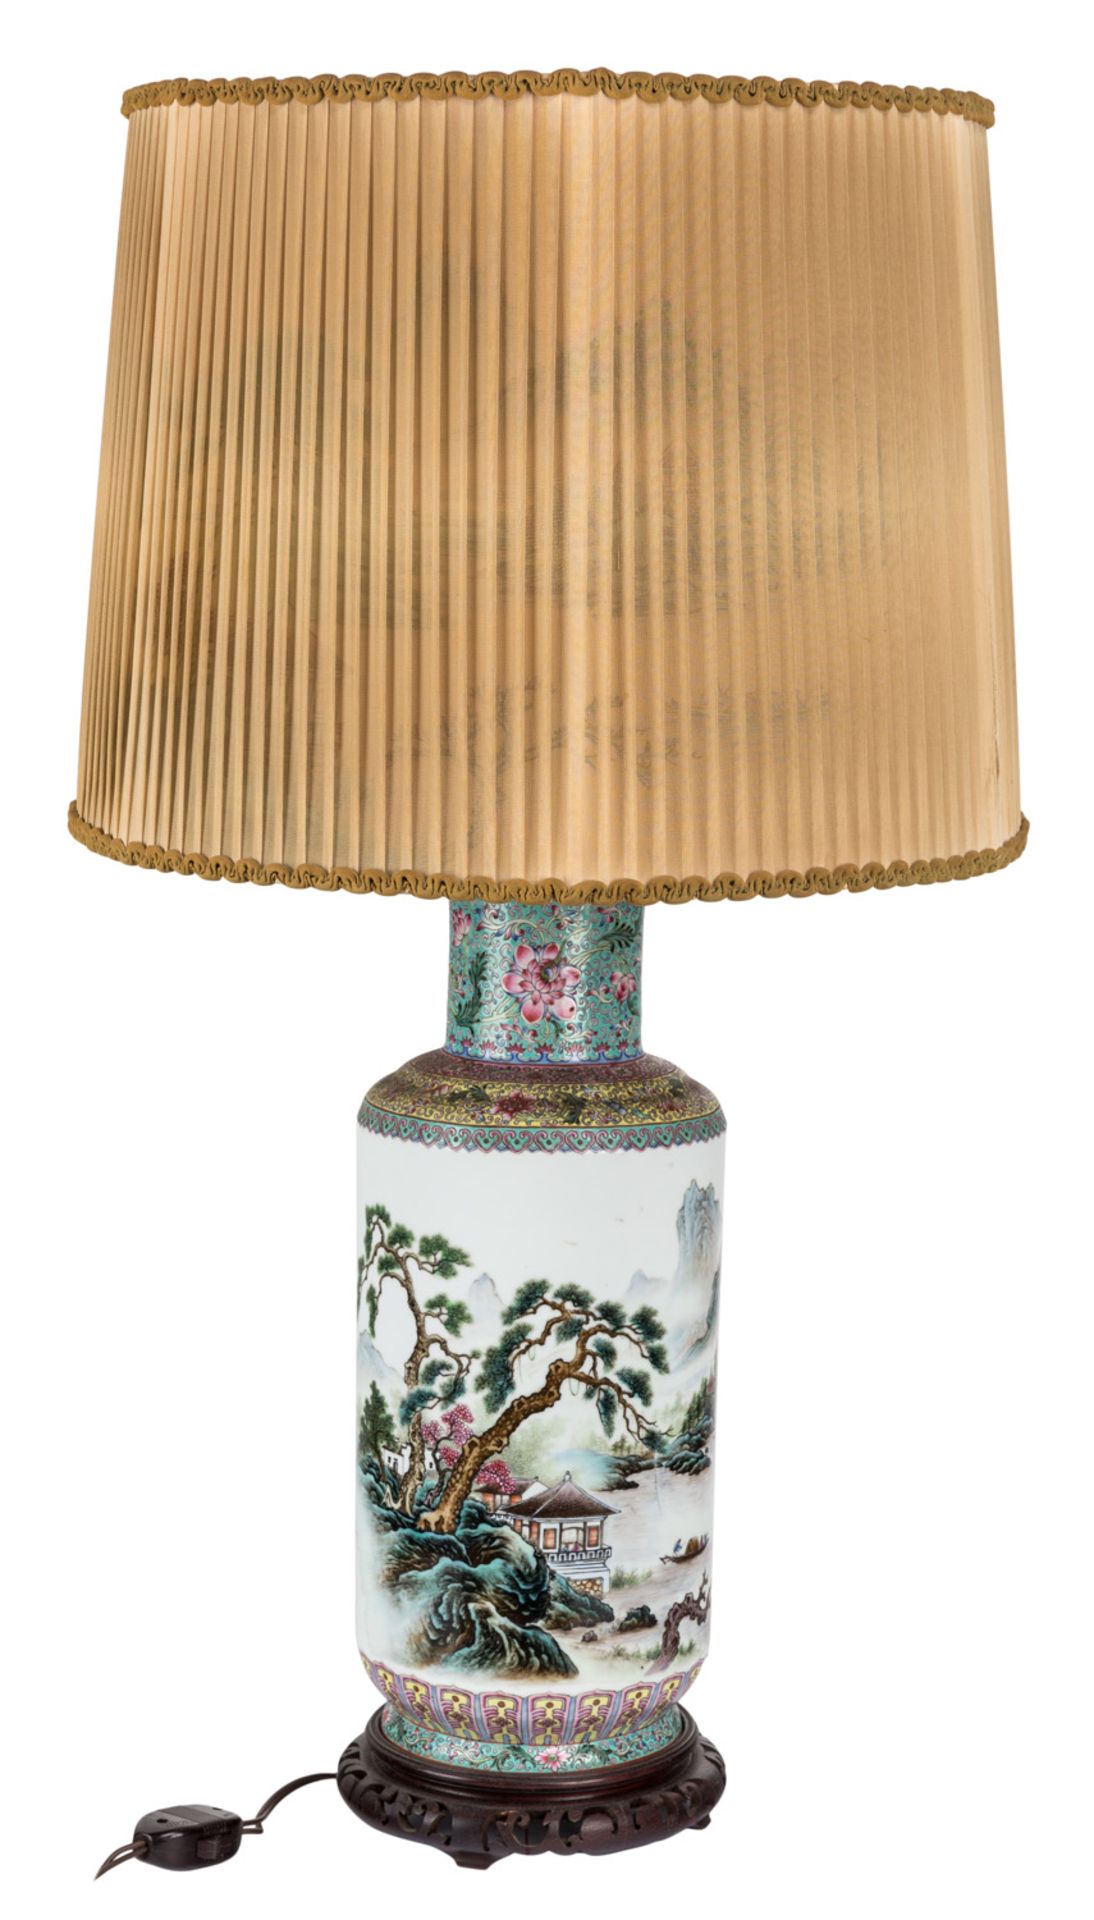 A CHINESE PORCELAIN LAMP AND UMBRELLA STAND (REPUBLIC PERIOD, 1912-1949) - Image 12 of 14